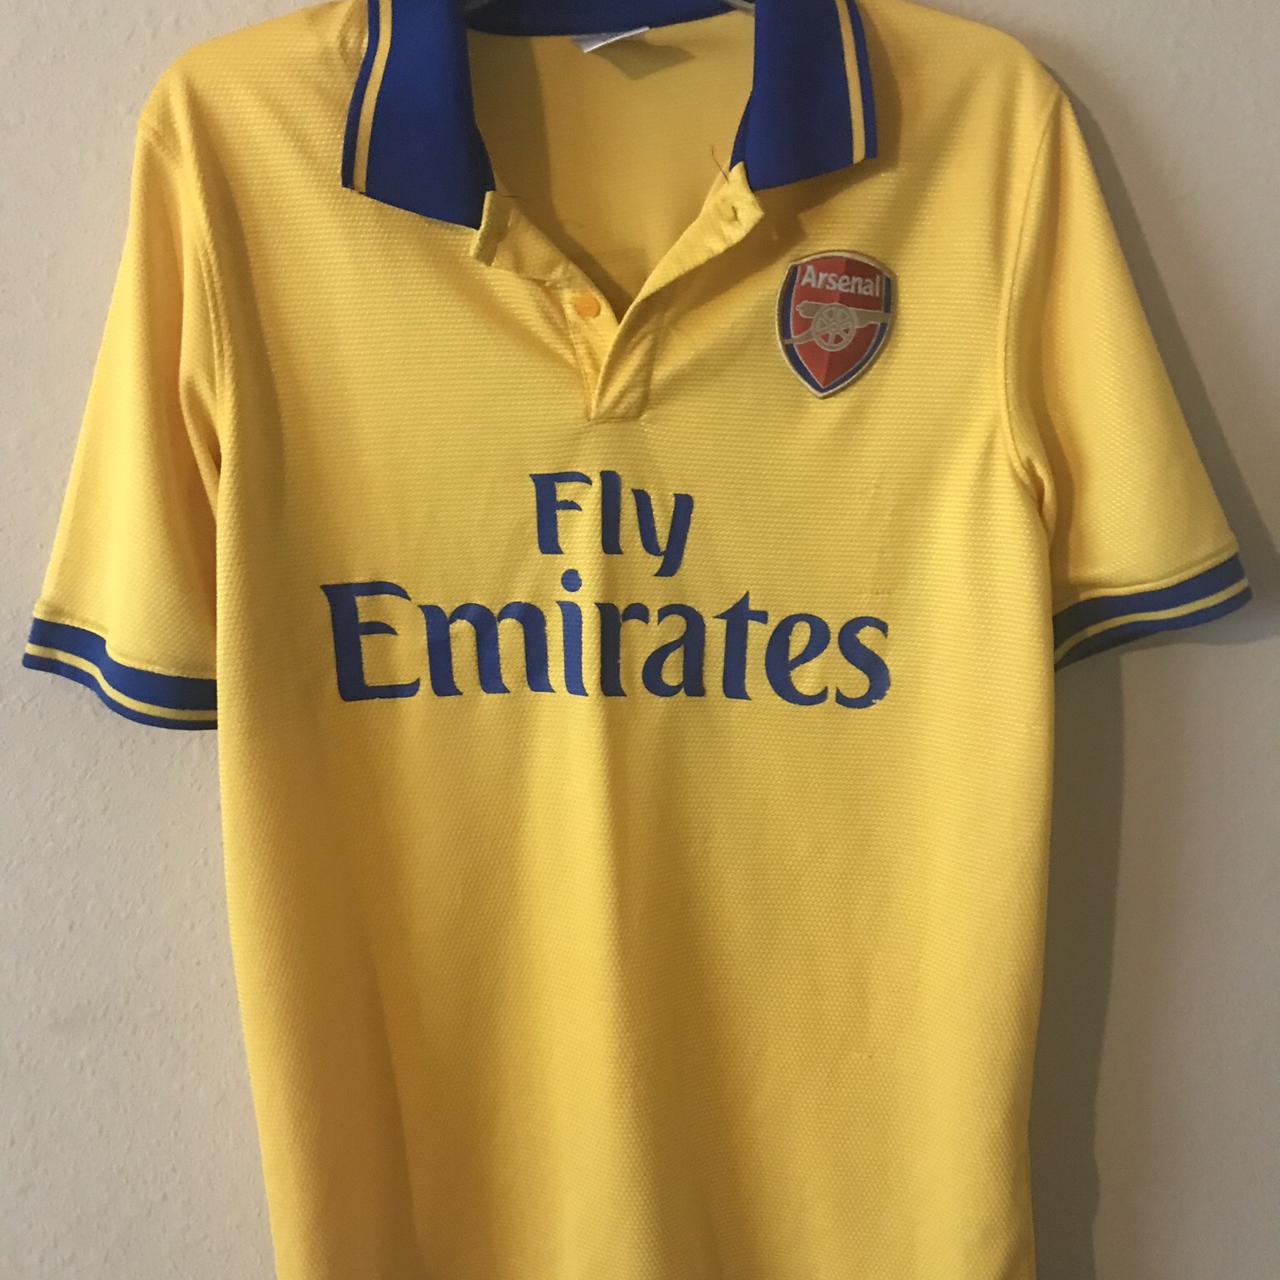 XL fly Emirates soccer jersey , fits a little tight